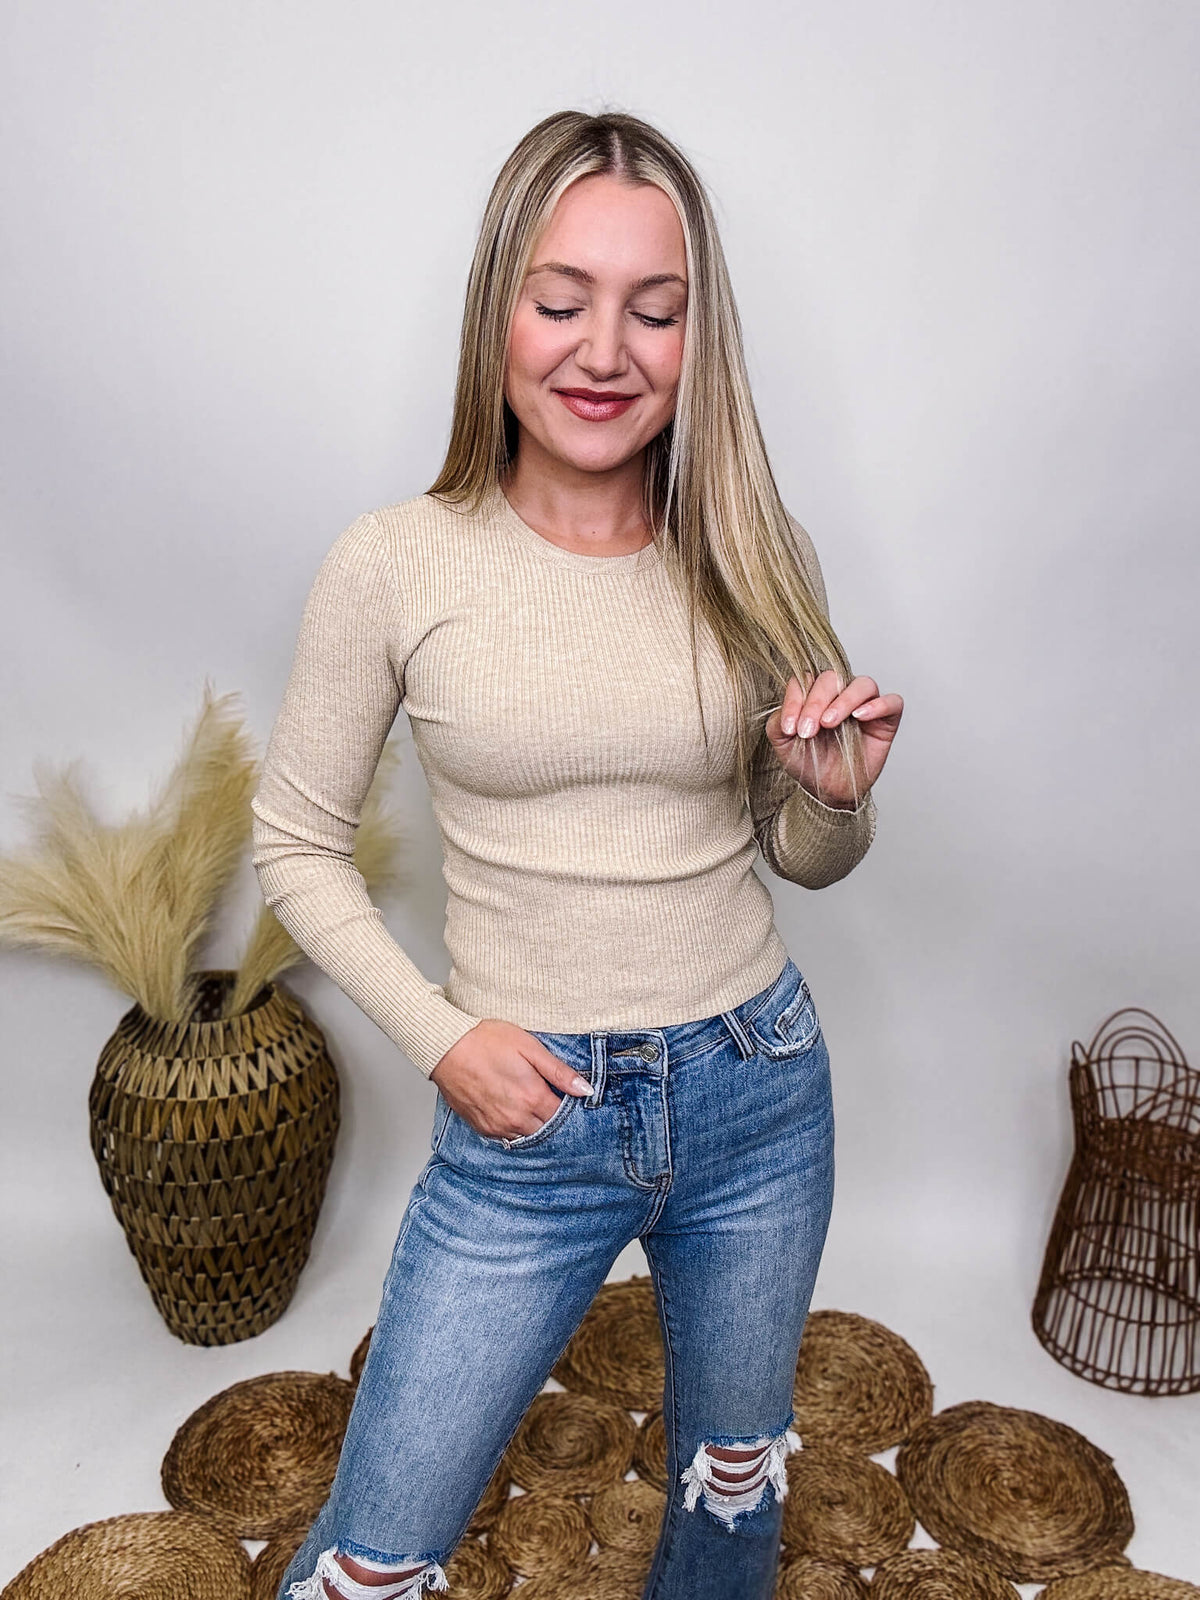 Active Basic Oatmeal Crew Neck Ribbed Detail Long Sleeve Top Soft Material Fitted and Stretchy 49% Viscose, 28% Polyester, 23% Nylon